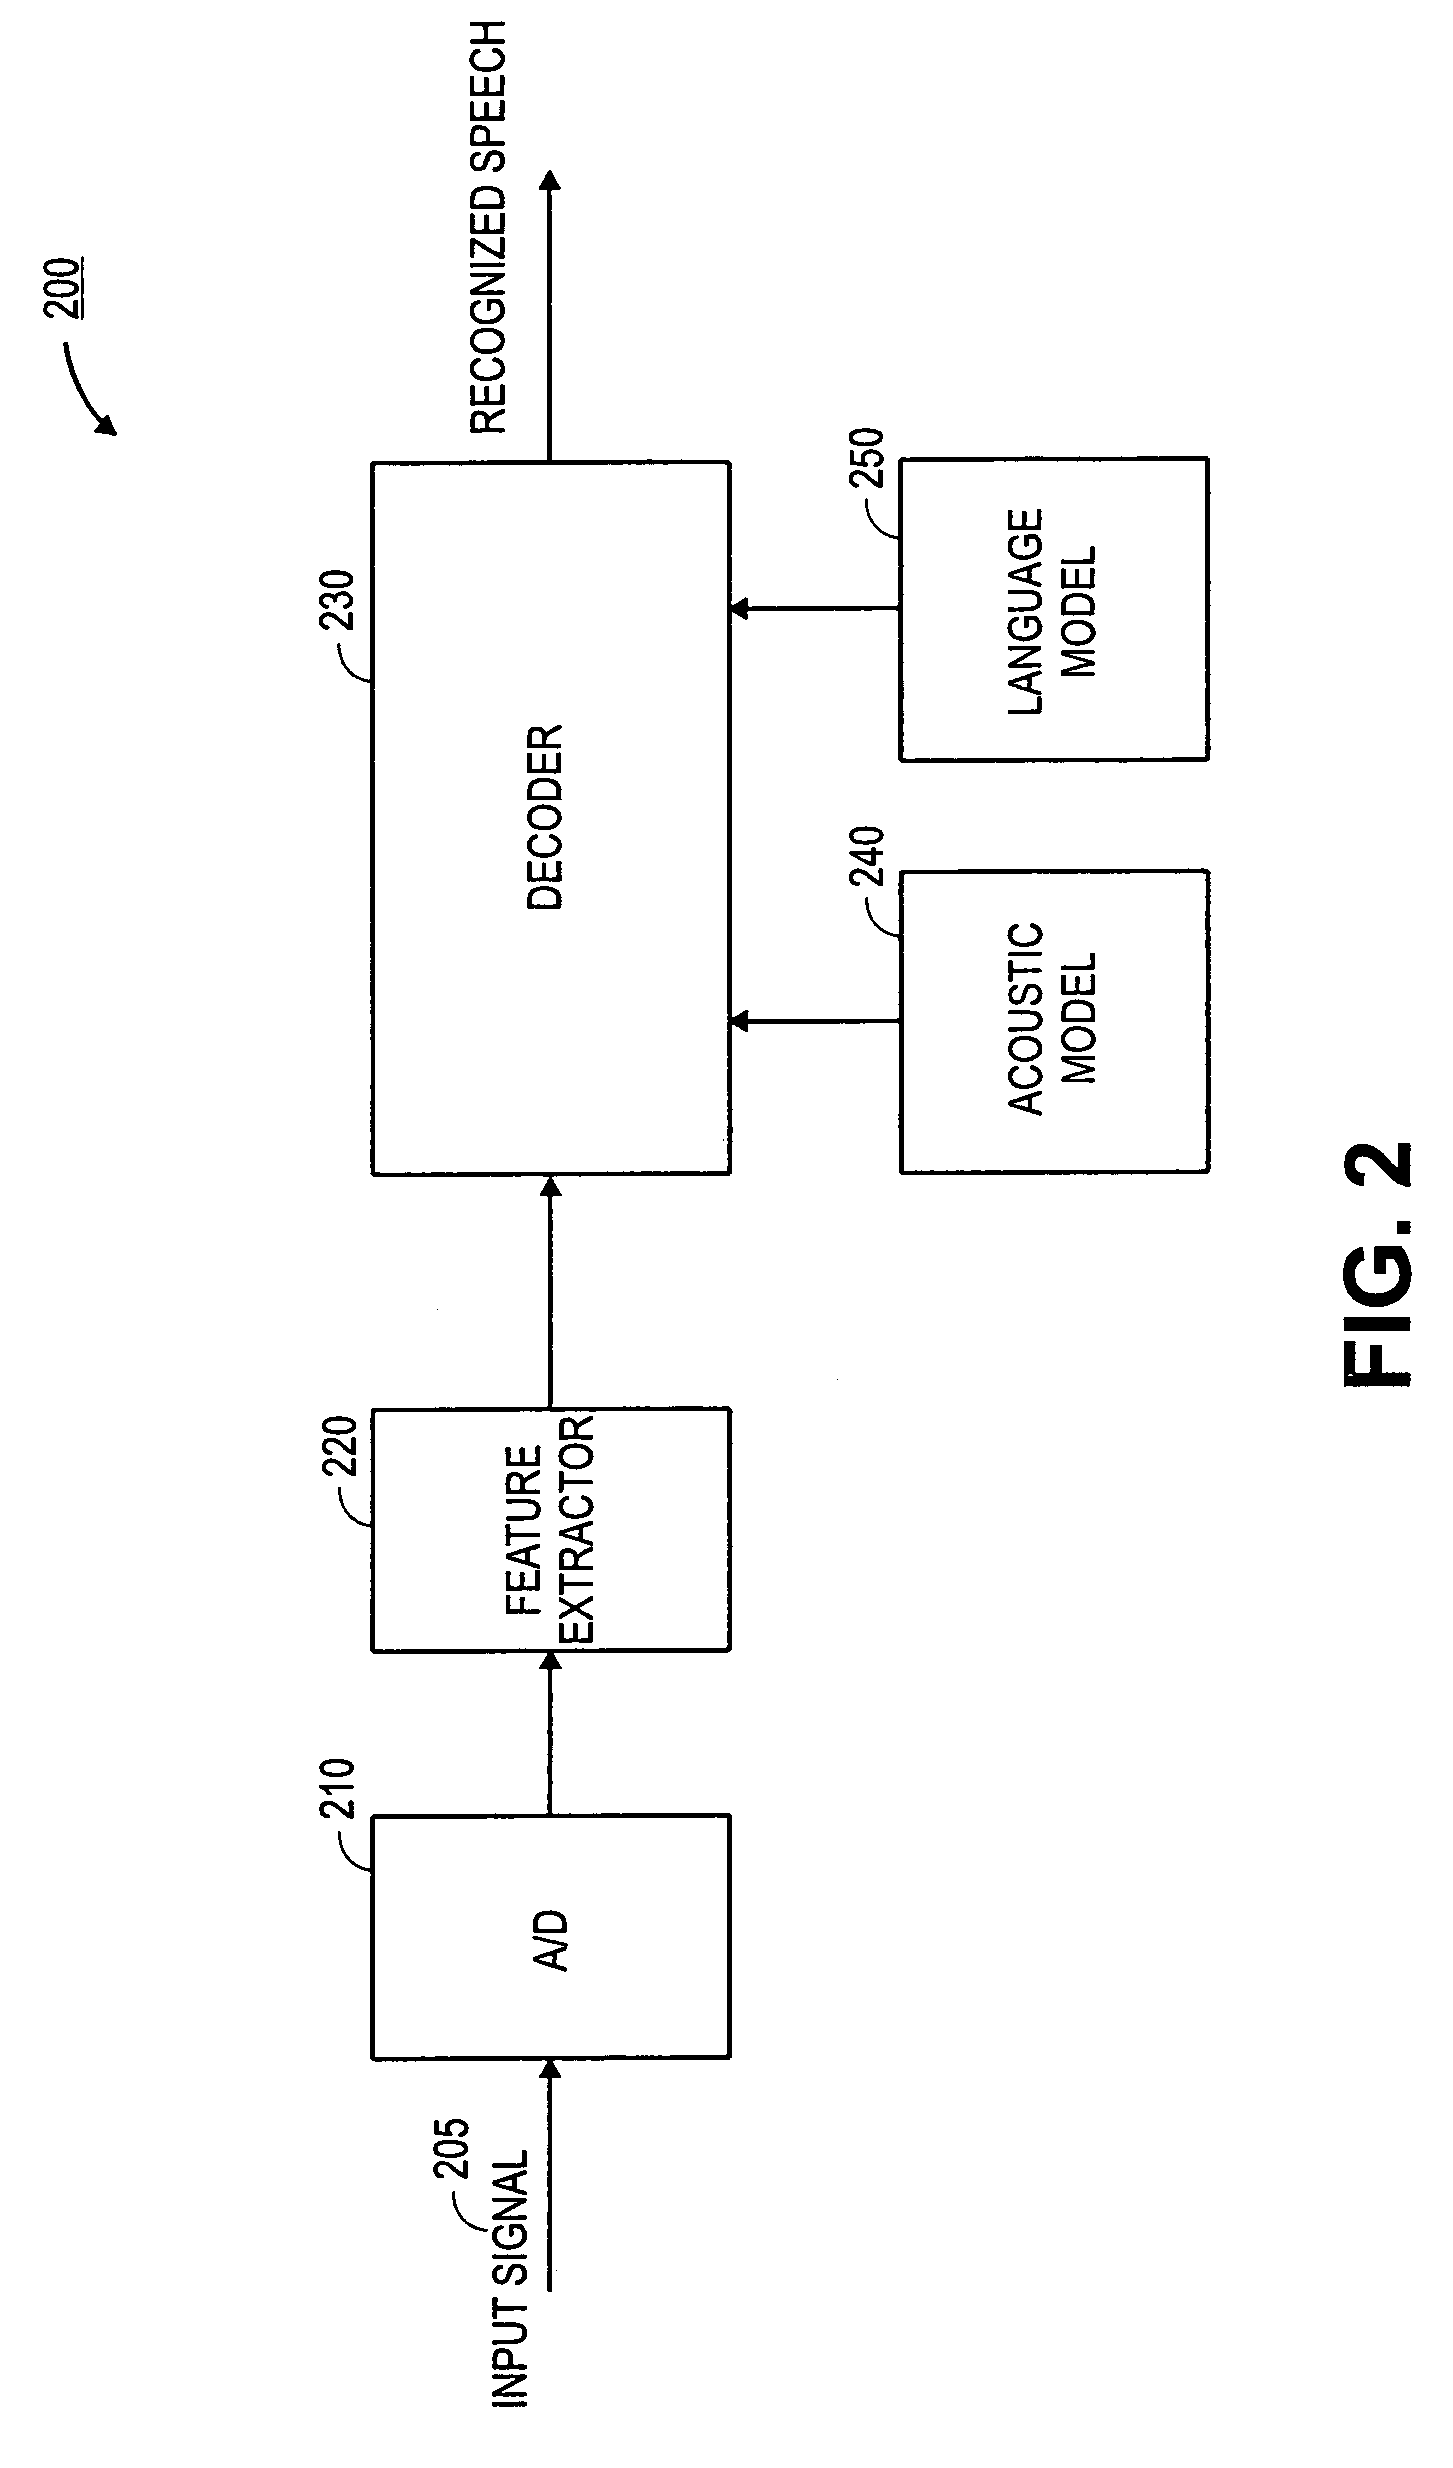 Method, apparatus, and system for bottom-up tone integration to Chinese continuous speech recognition system